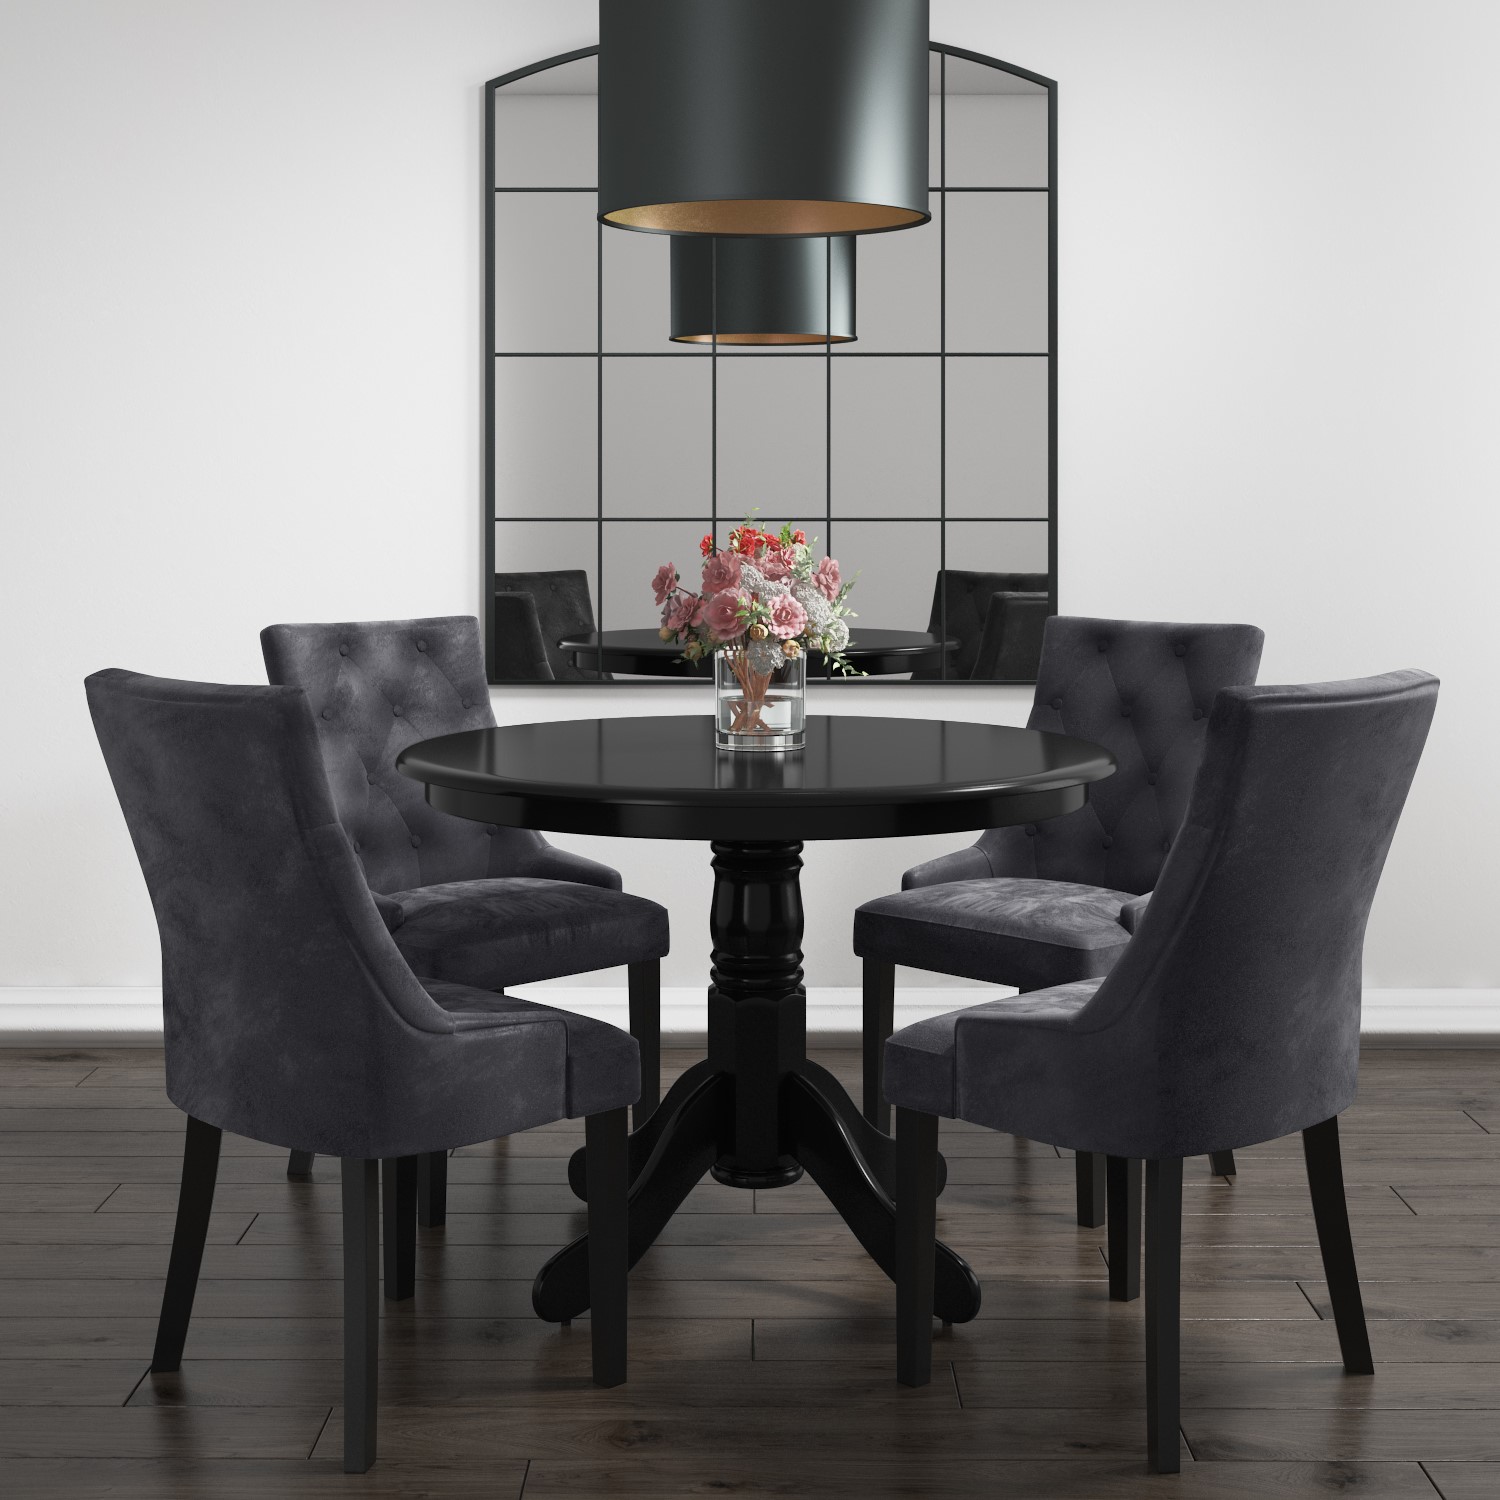 Velvet Dining Chairs Charcoal Grey, Grey Dining Room Chairs Black Legs